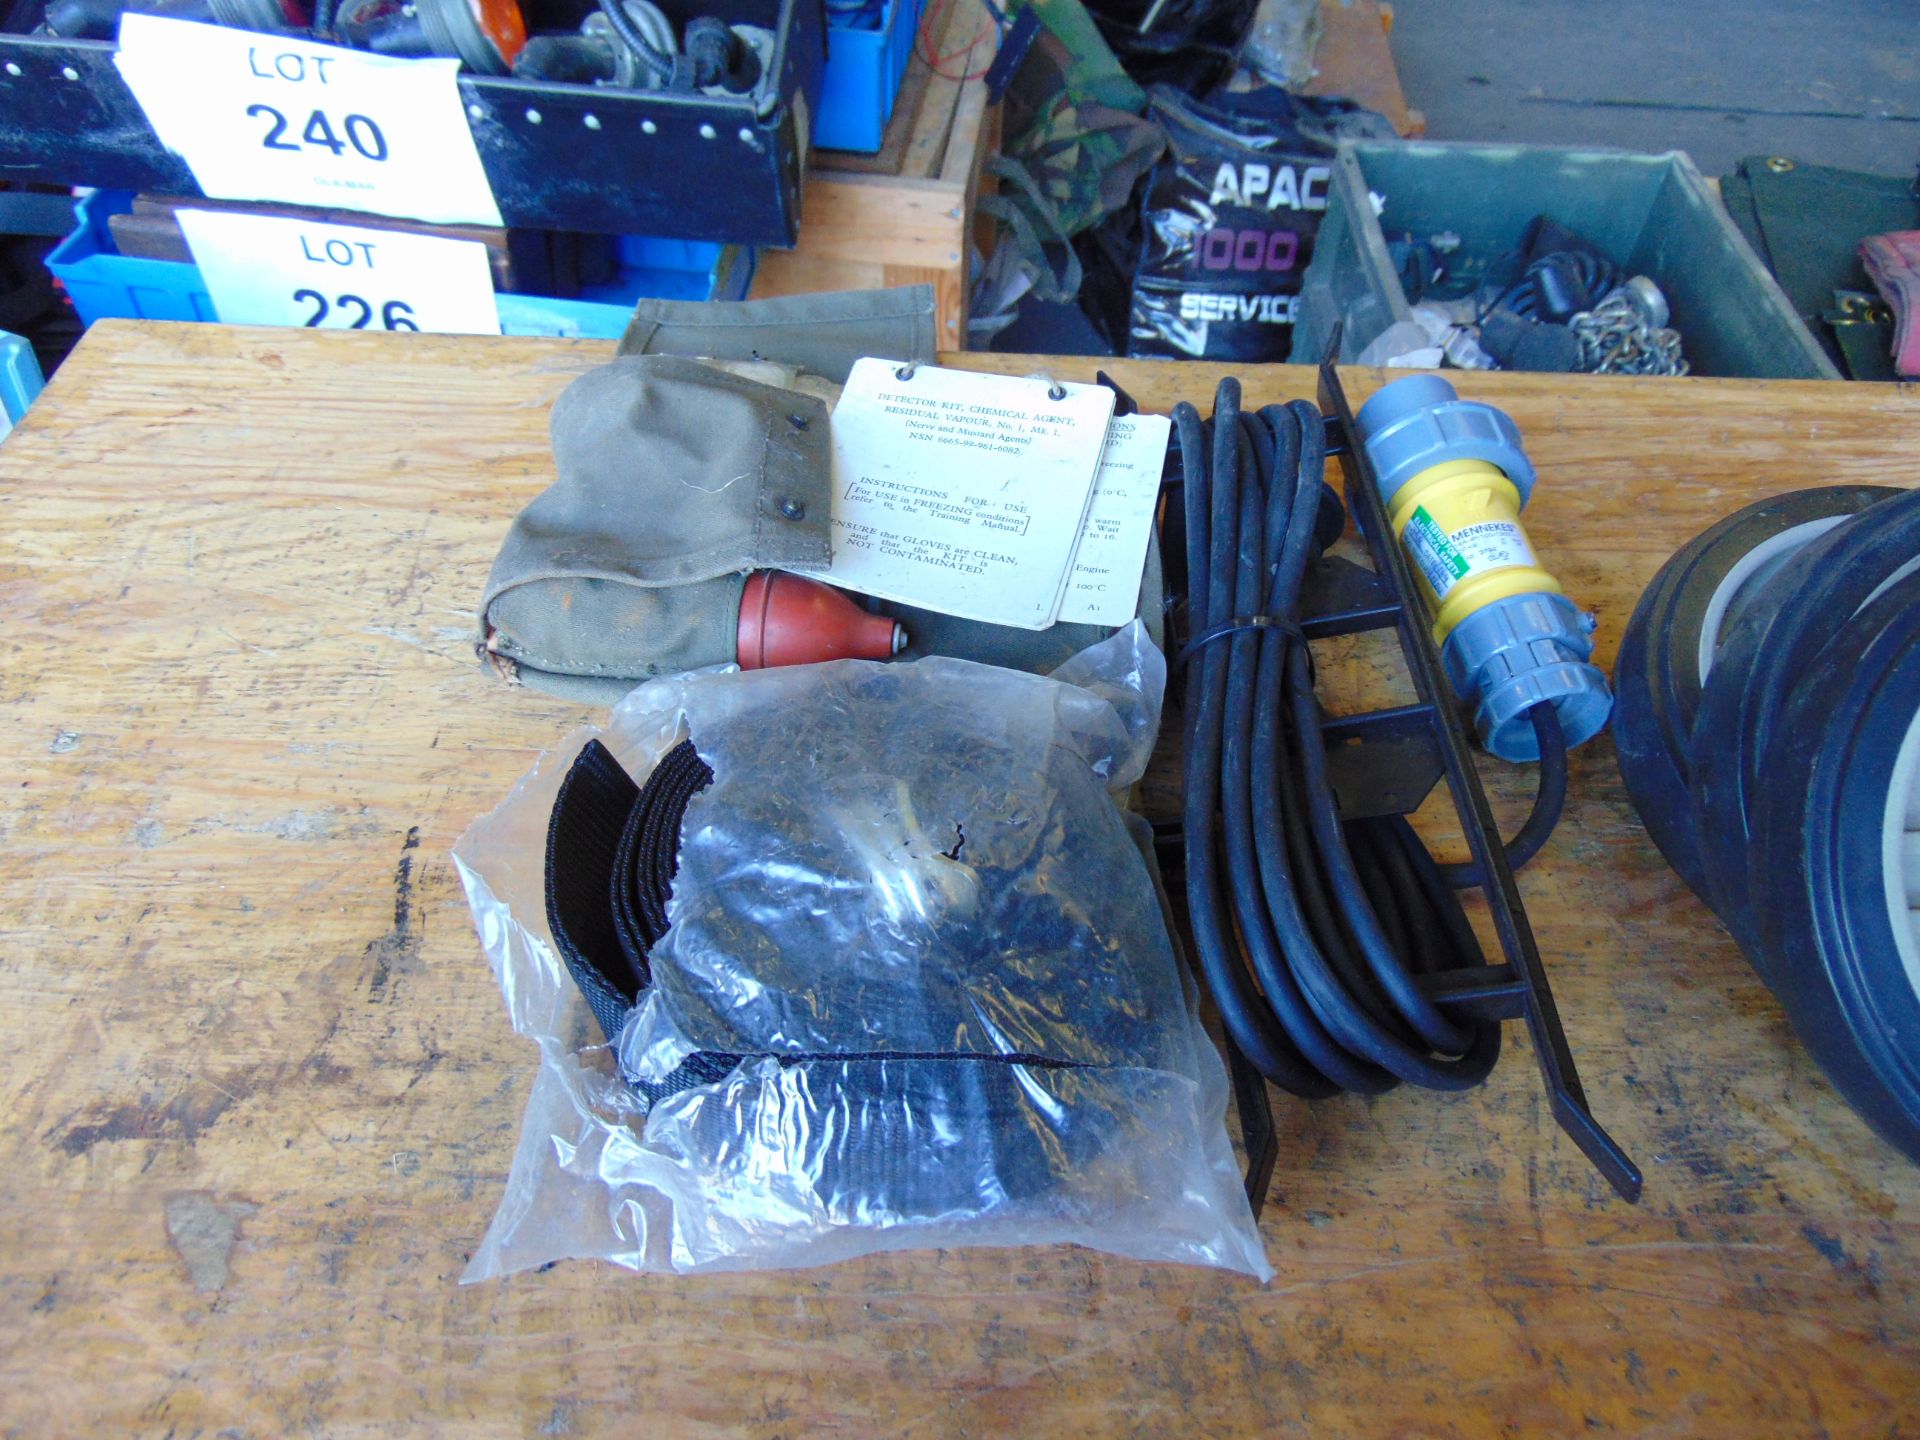 Wheels, Ext Lead, Straps, Chemical Agent Test Kit - Image 6 of 6